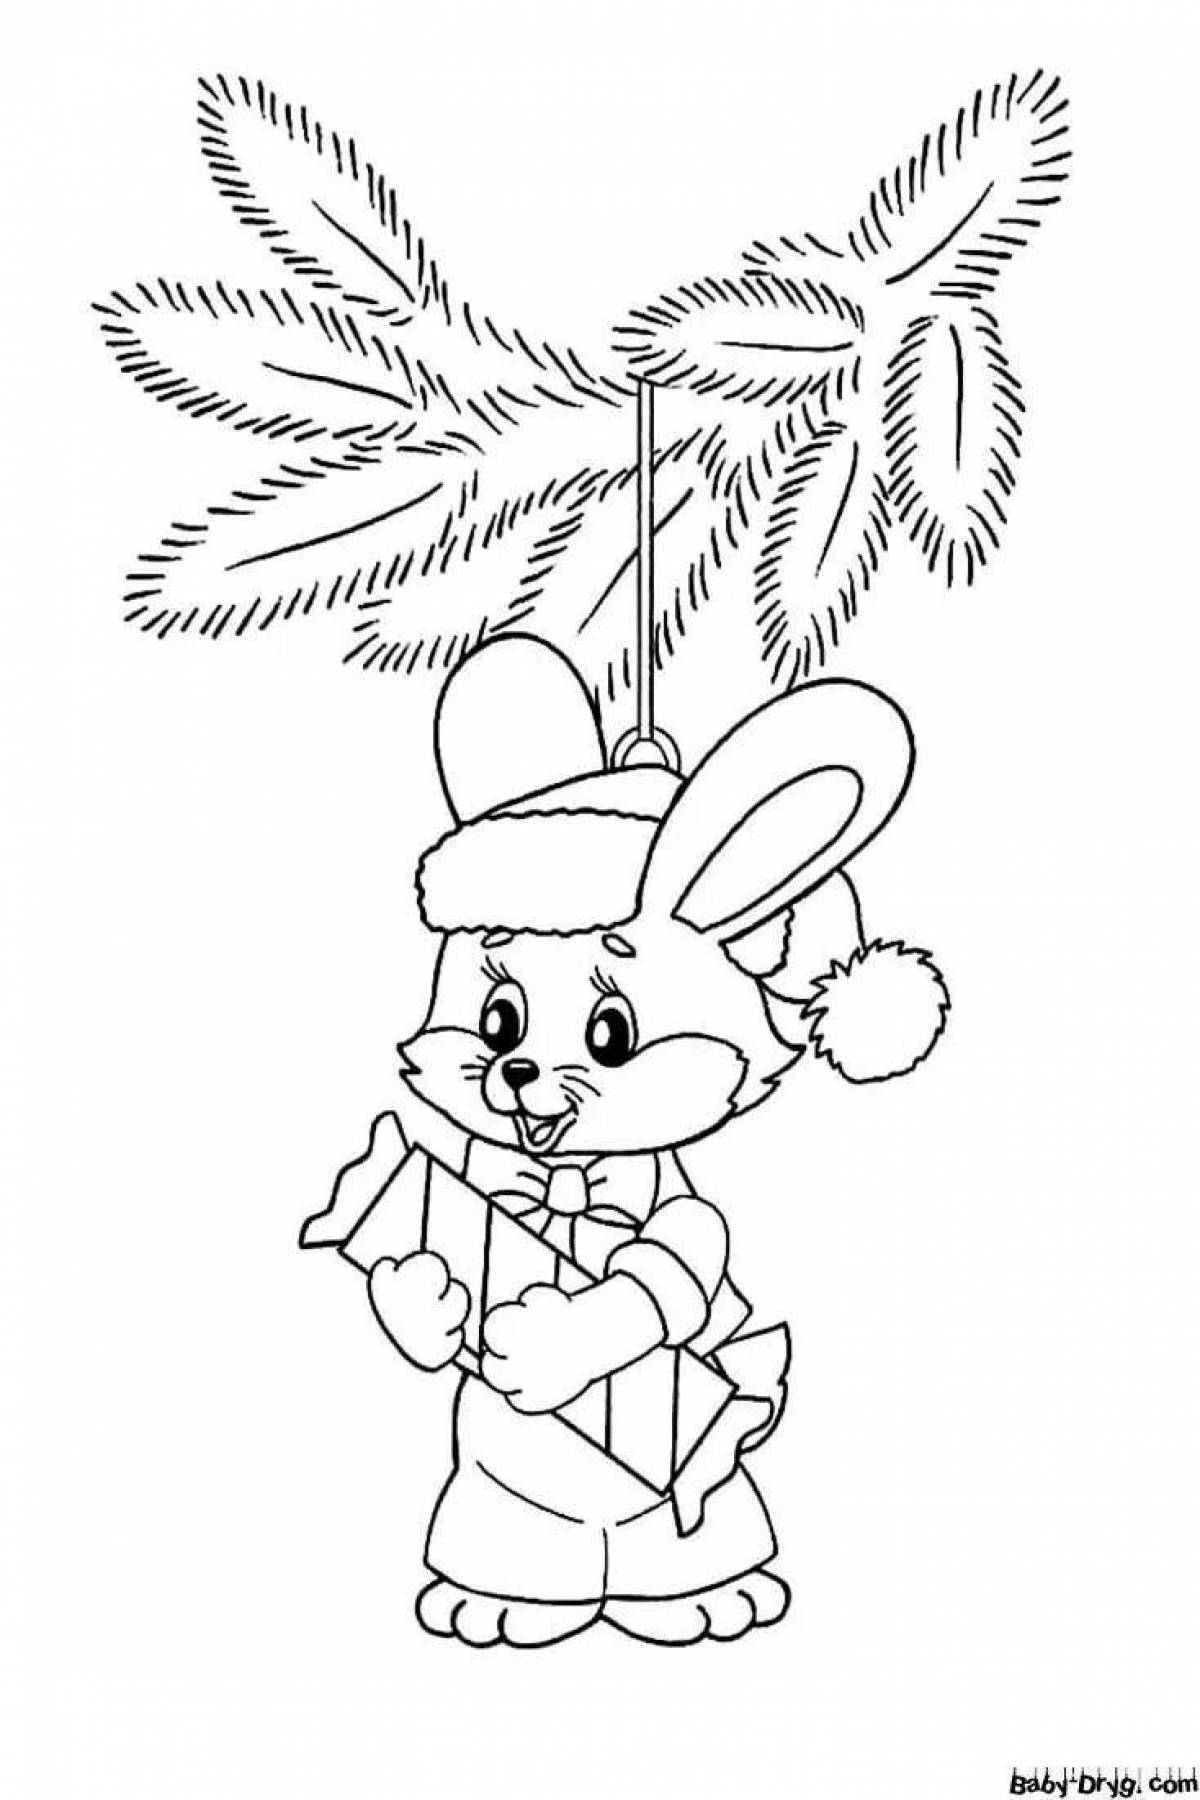 Coloring book playful hare